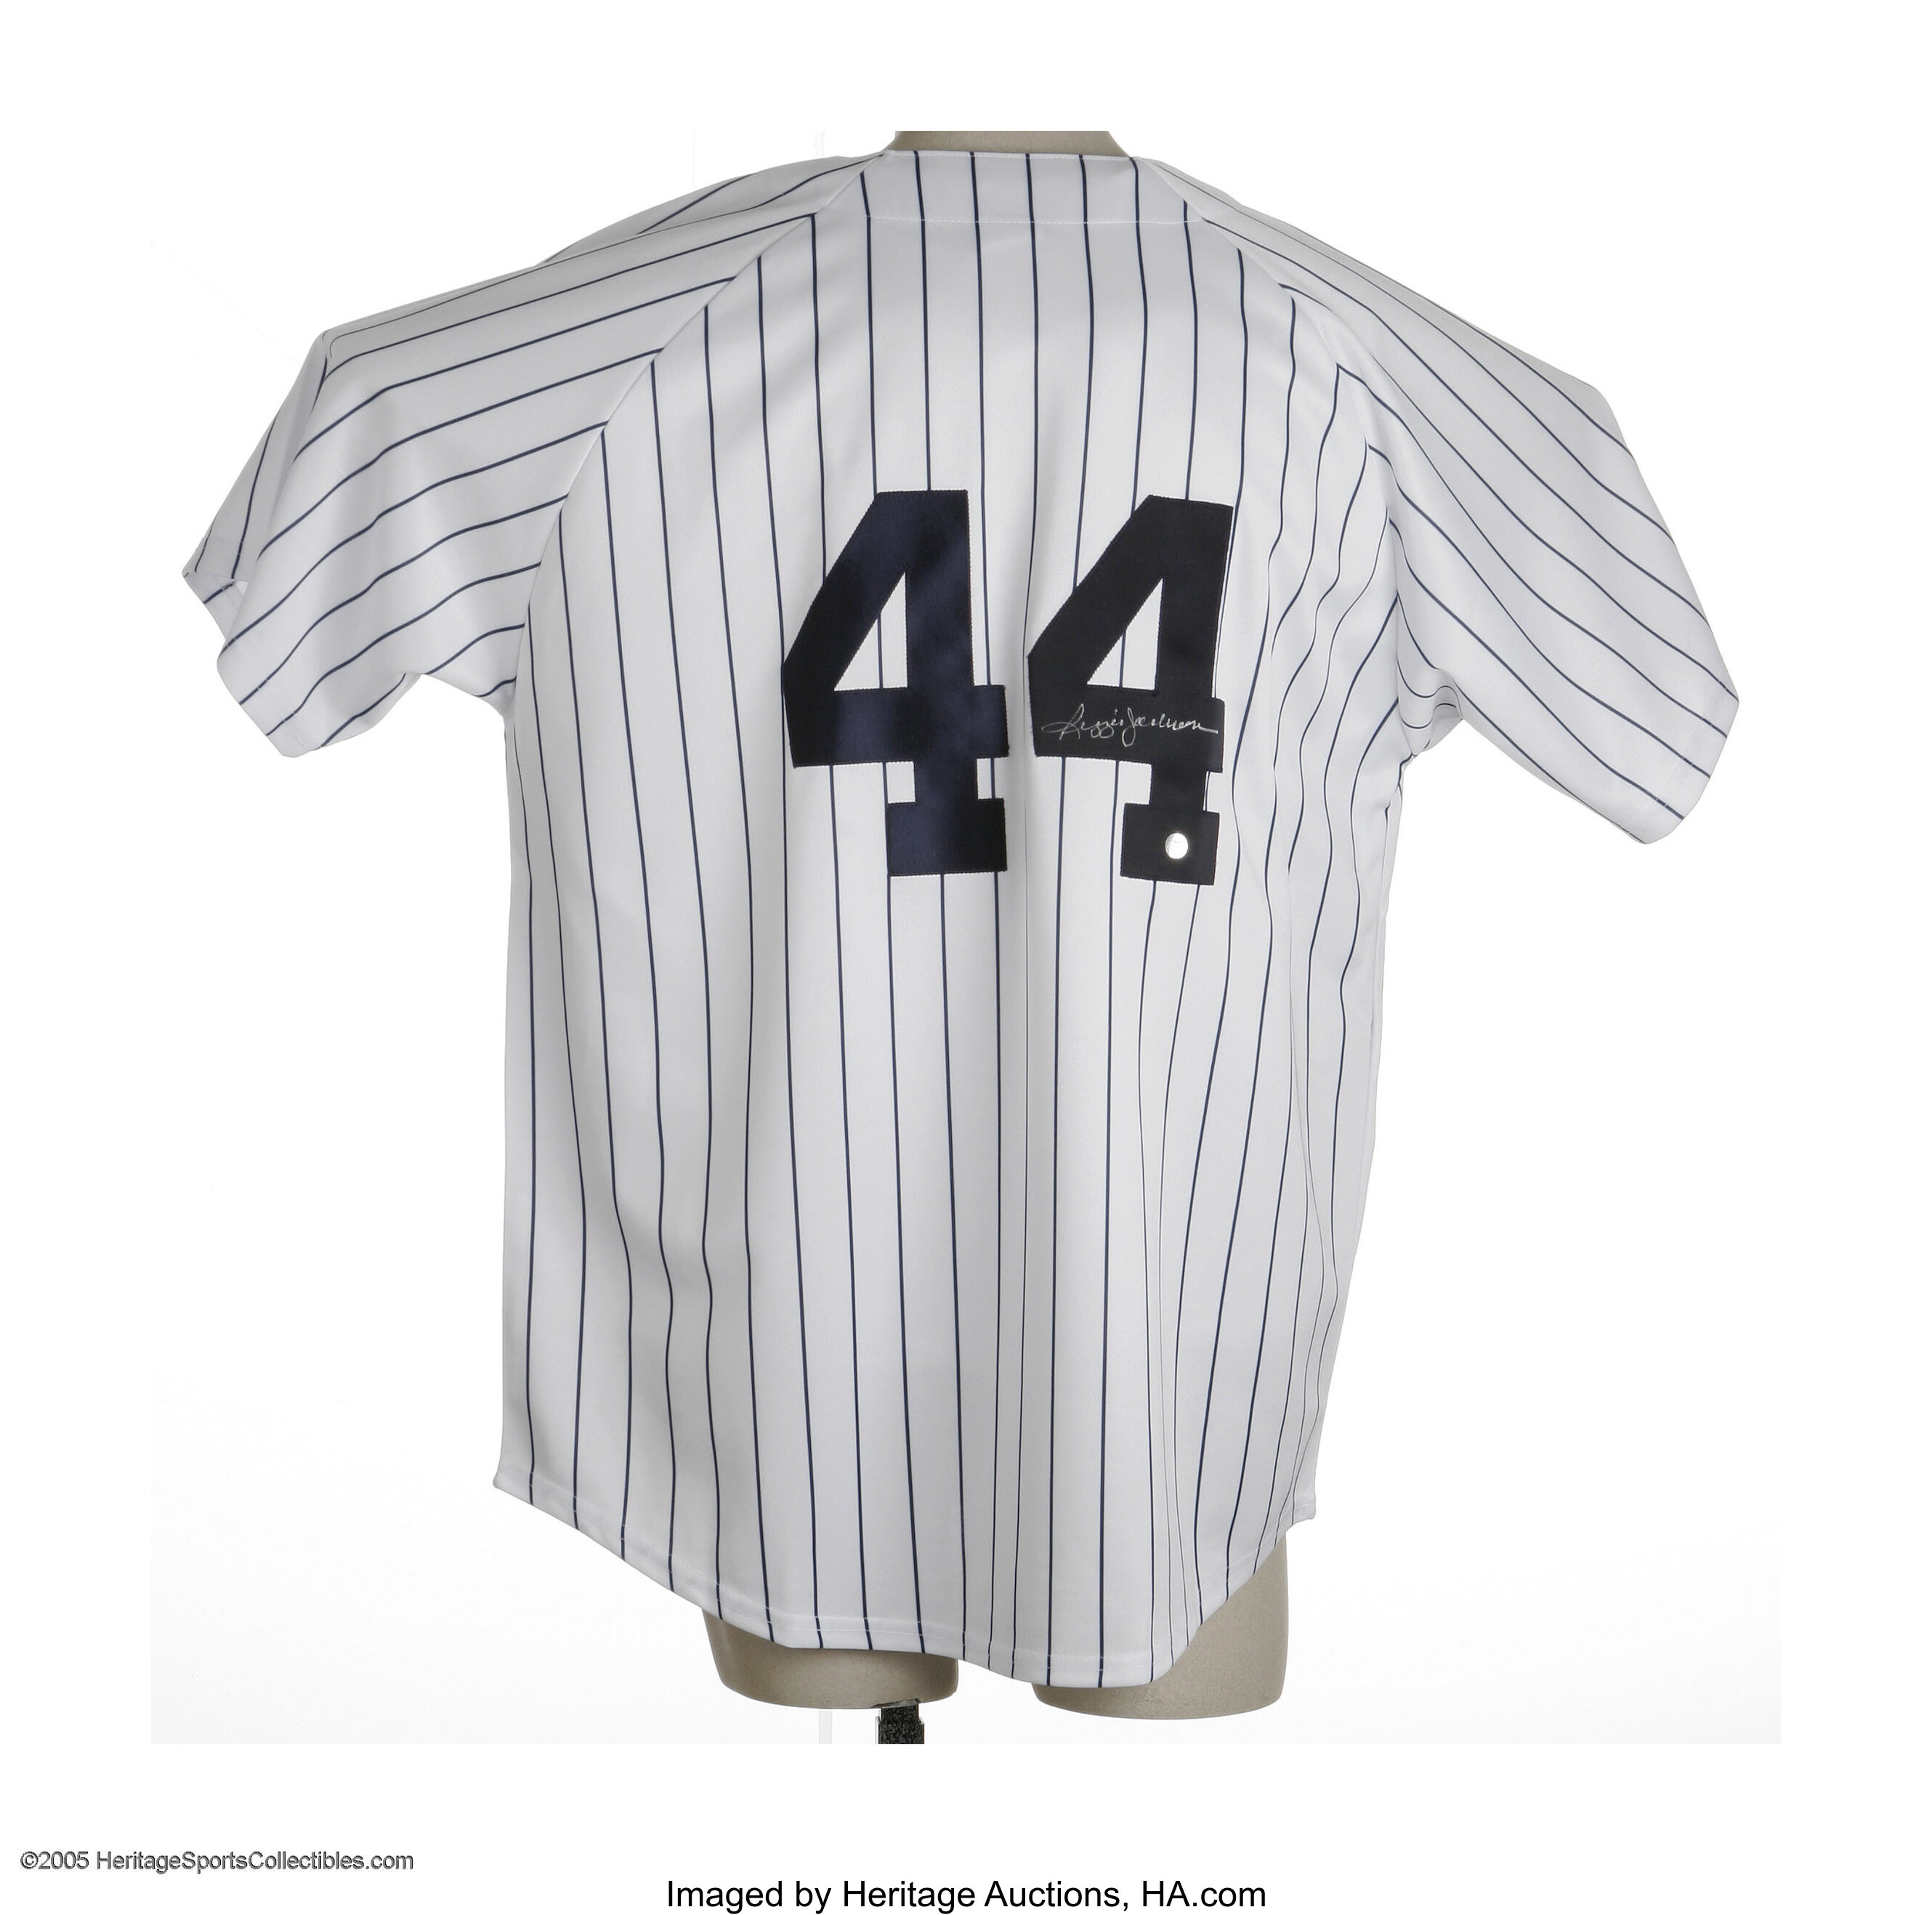 Reggie Jackson Signed Jersey. Number 44 on the back of a